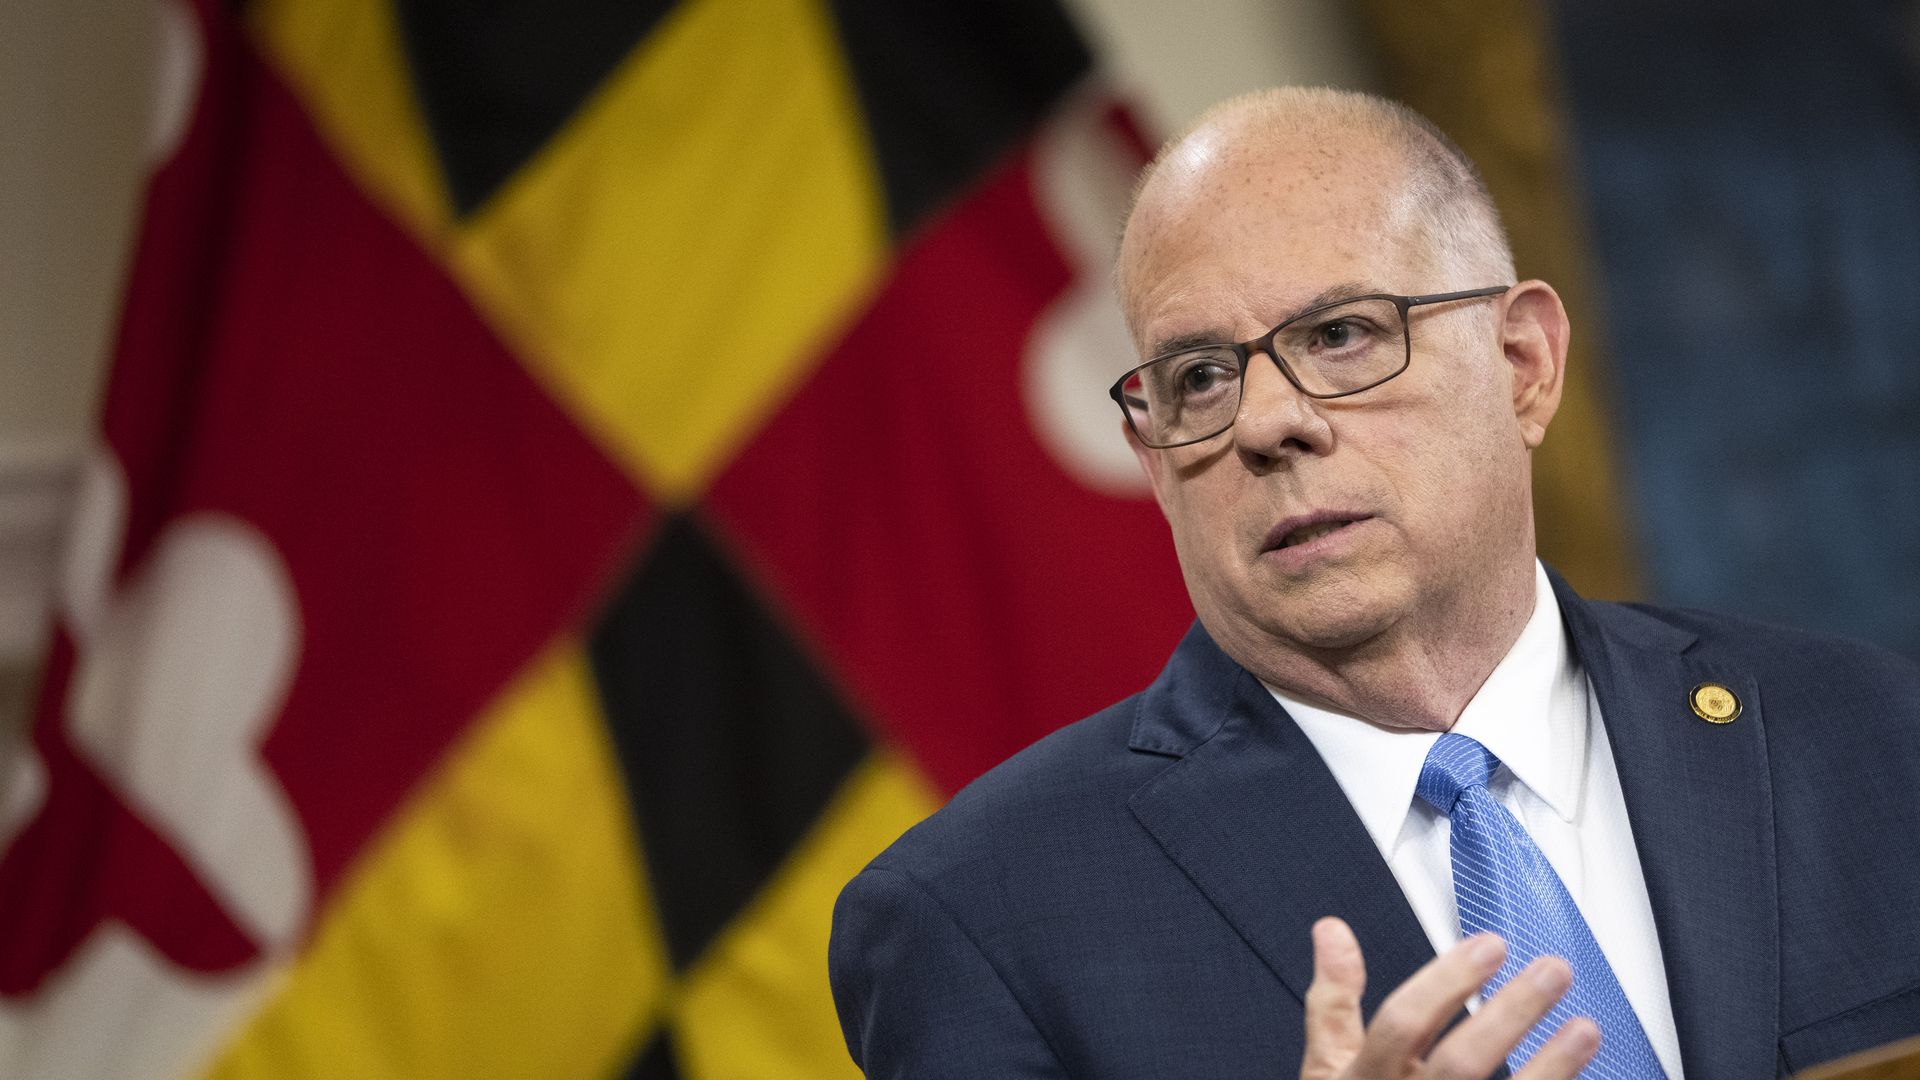 Maryland Gov. Larry Hogan gestures with his right hand at a lectern with the Maryland flag behind him